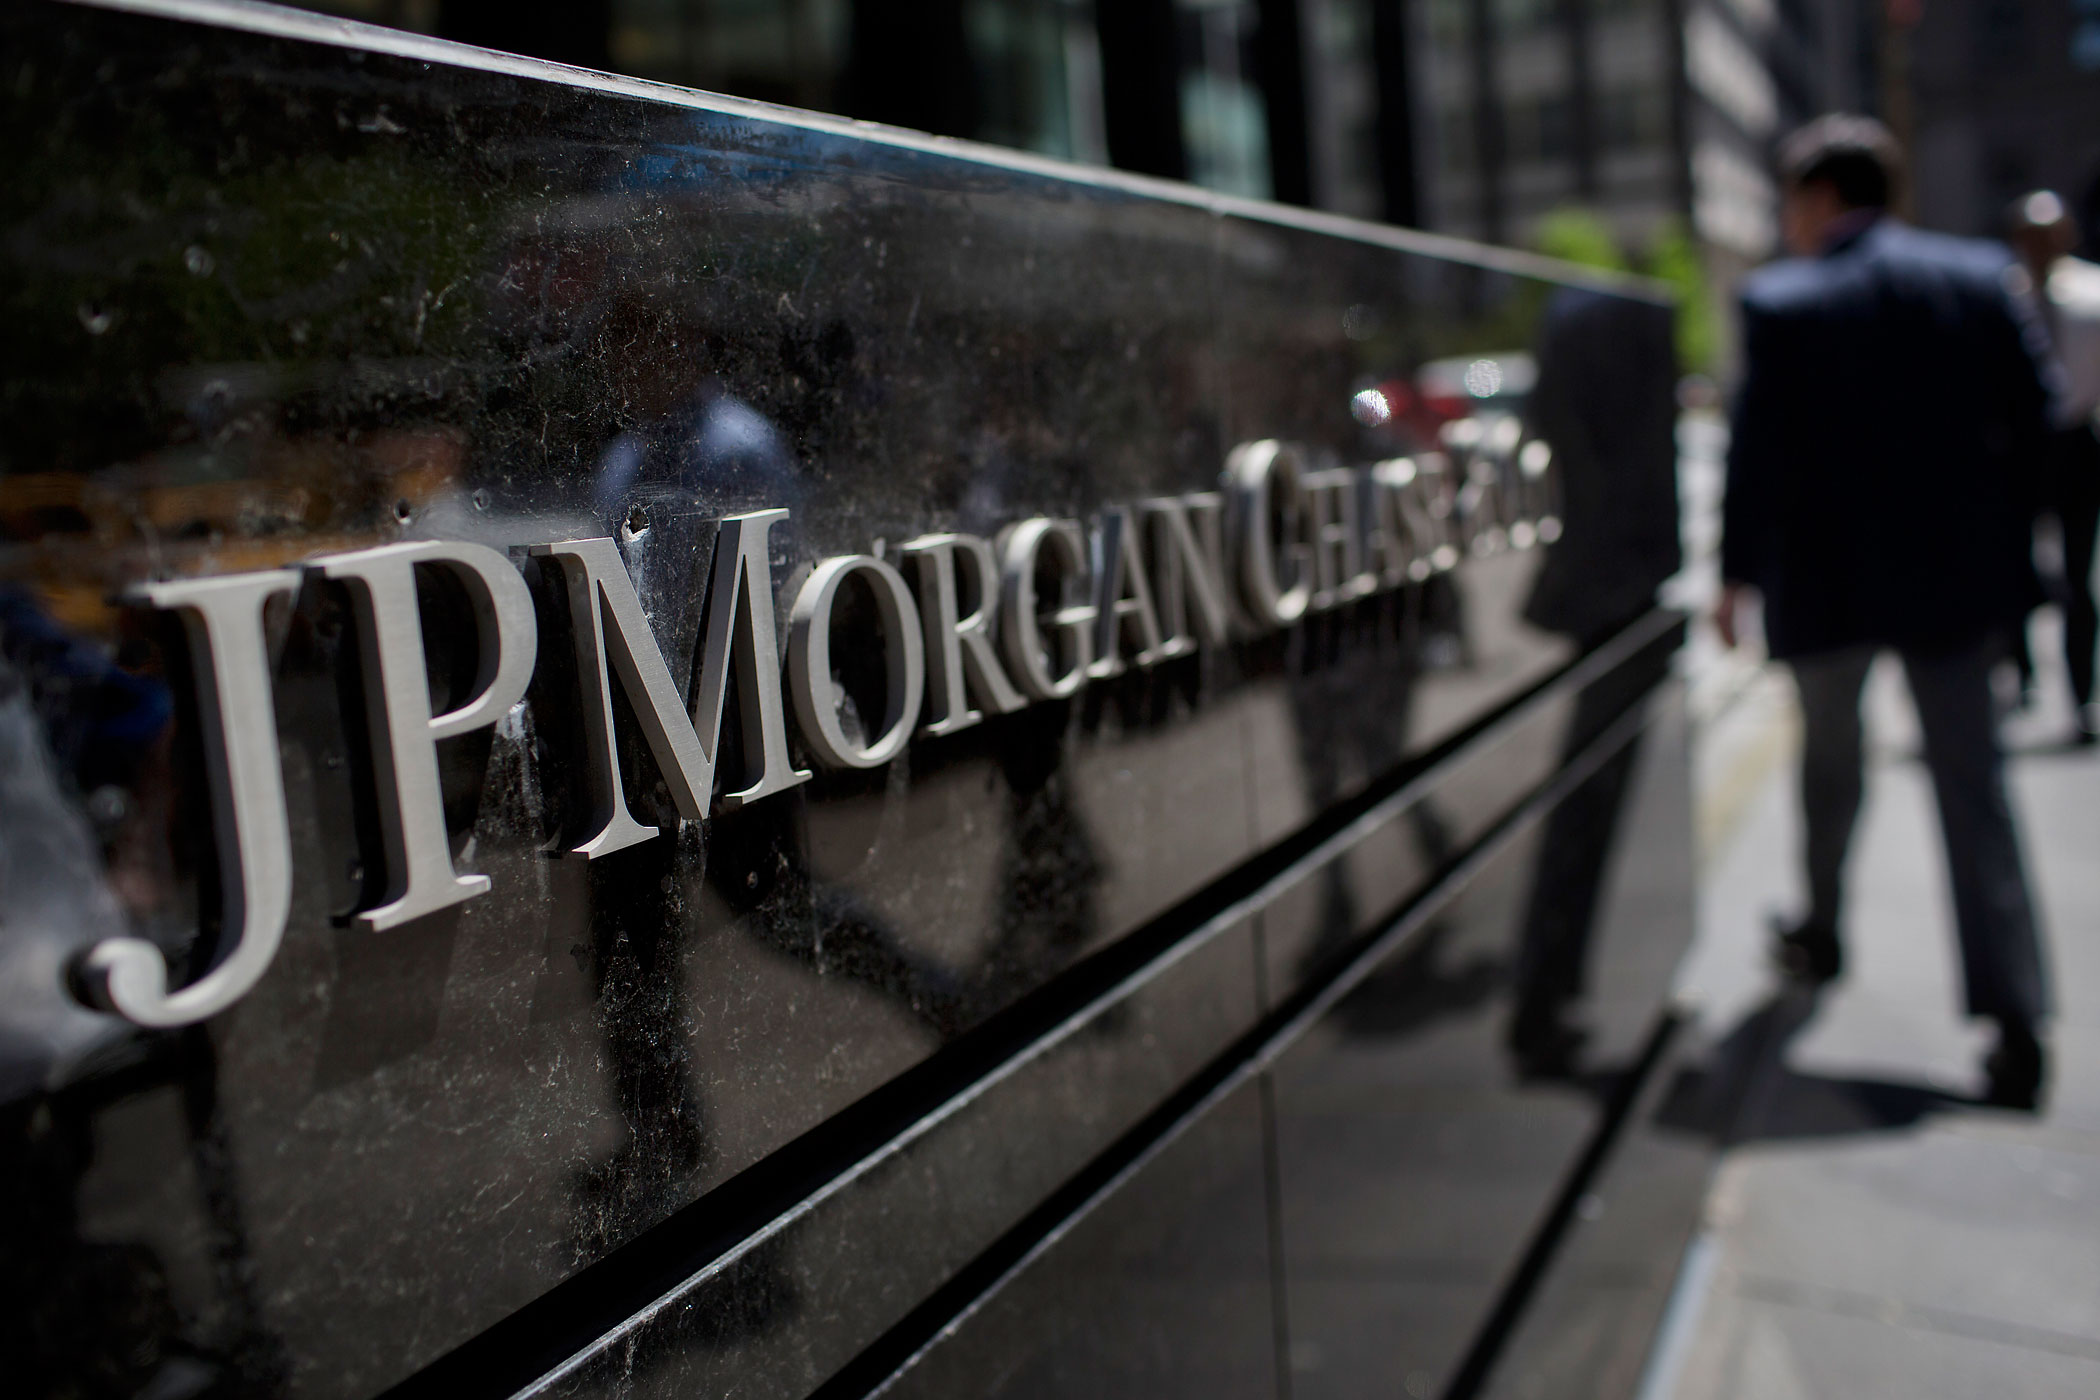 JPMorgan Holders Led by Chairmen-CEOs to Vote on Dimon's Titles